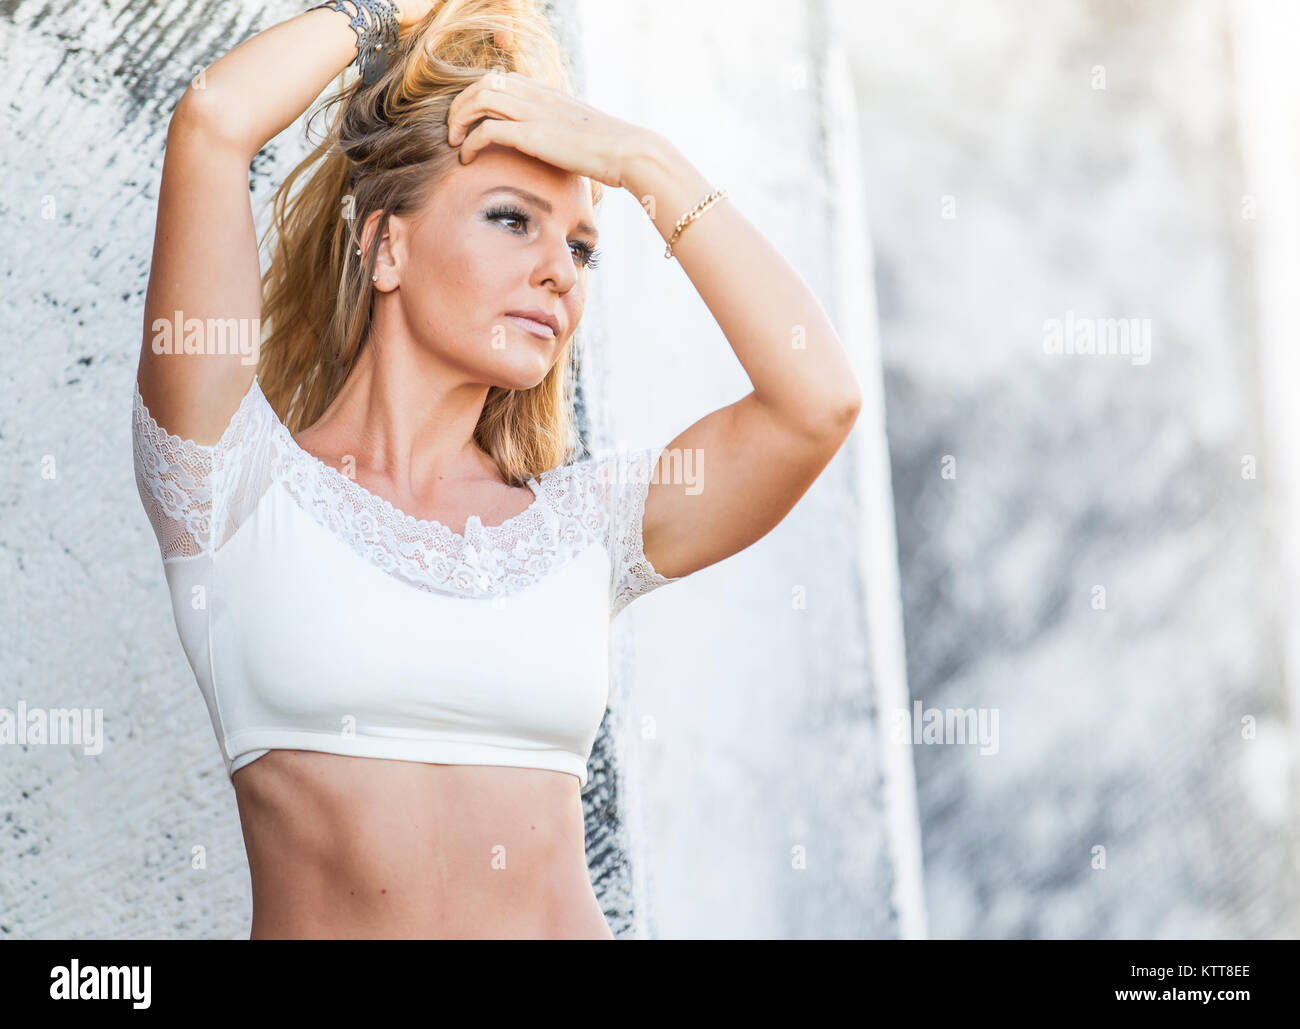 City girl fitness model playing with her hair, emotional Stock Photo